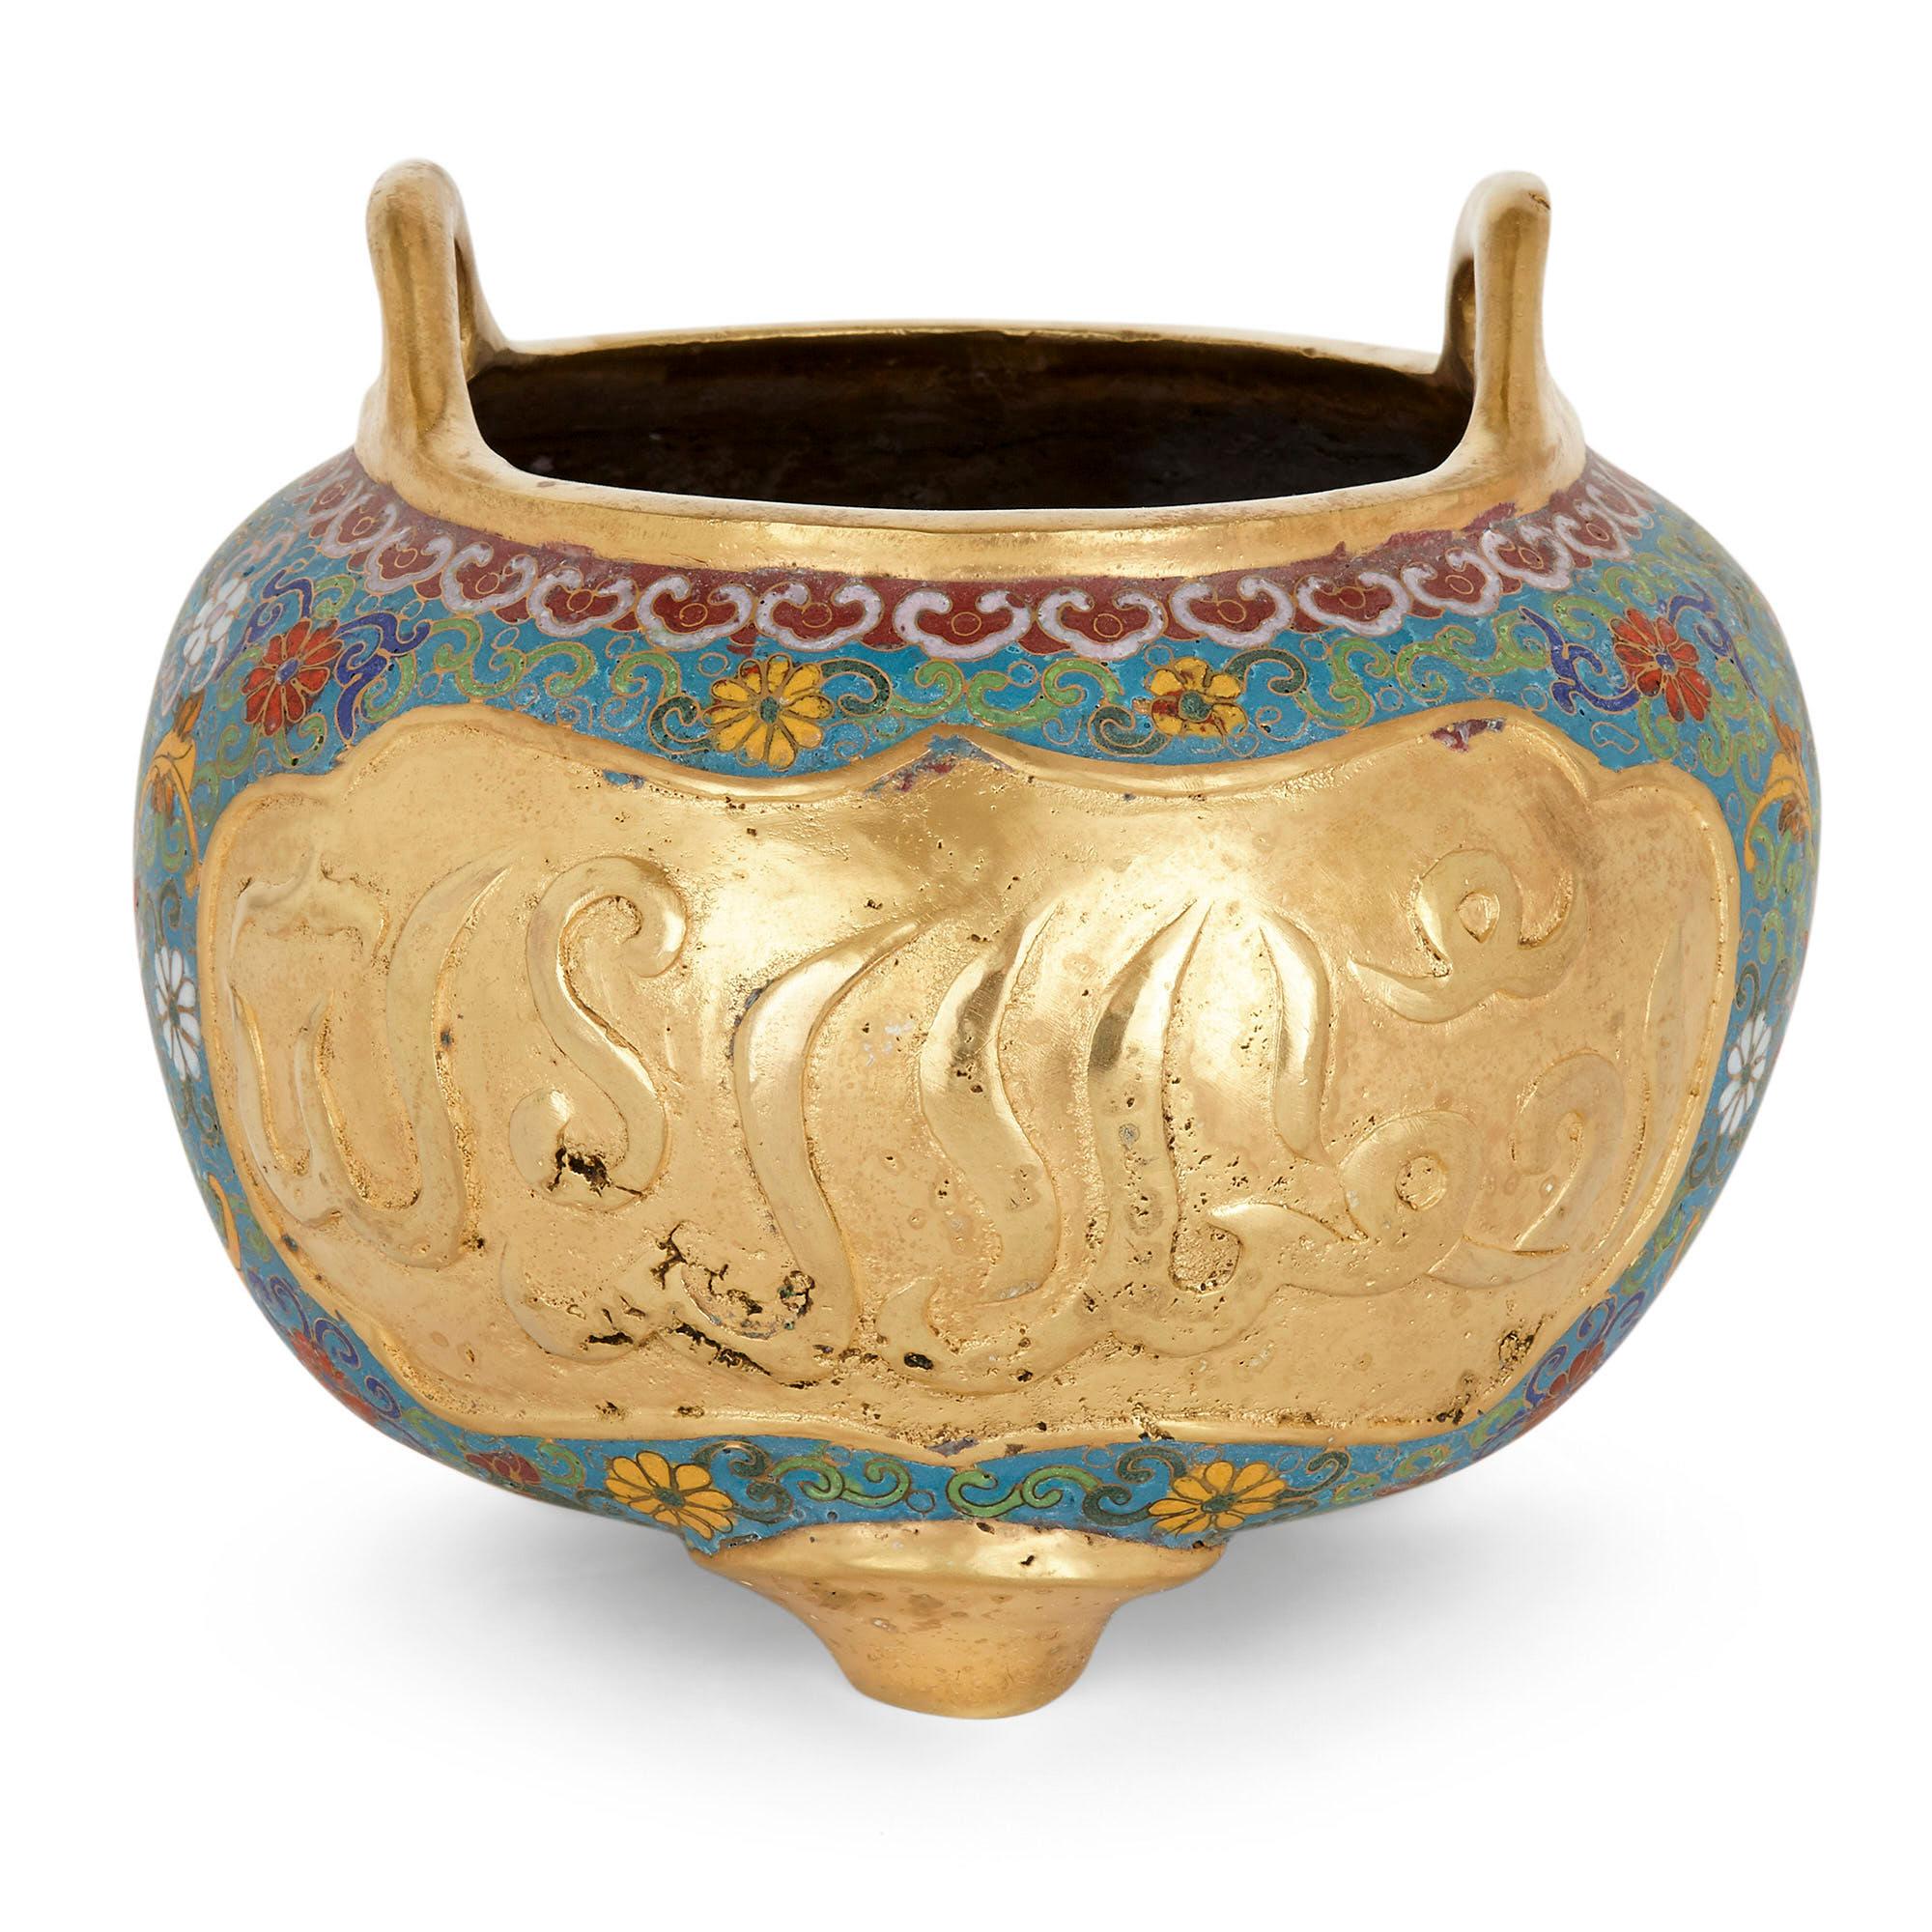 Chinese Ormolu and Cloisonné enamel vase for the Islamic Market
Chinese, early 20th century
Dimensions: Height 19cm, diameter 23cm

Crafted in China, this fine ormolu and cloisonné enamel bowl was intended for export to Islamic markets. Sitting